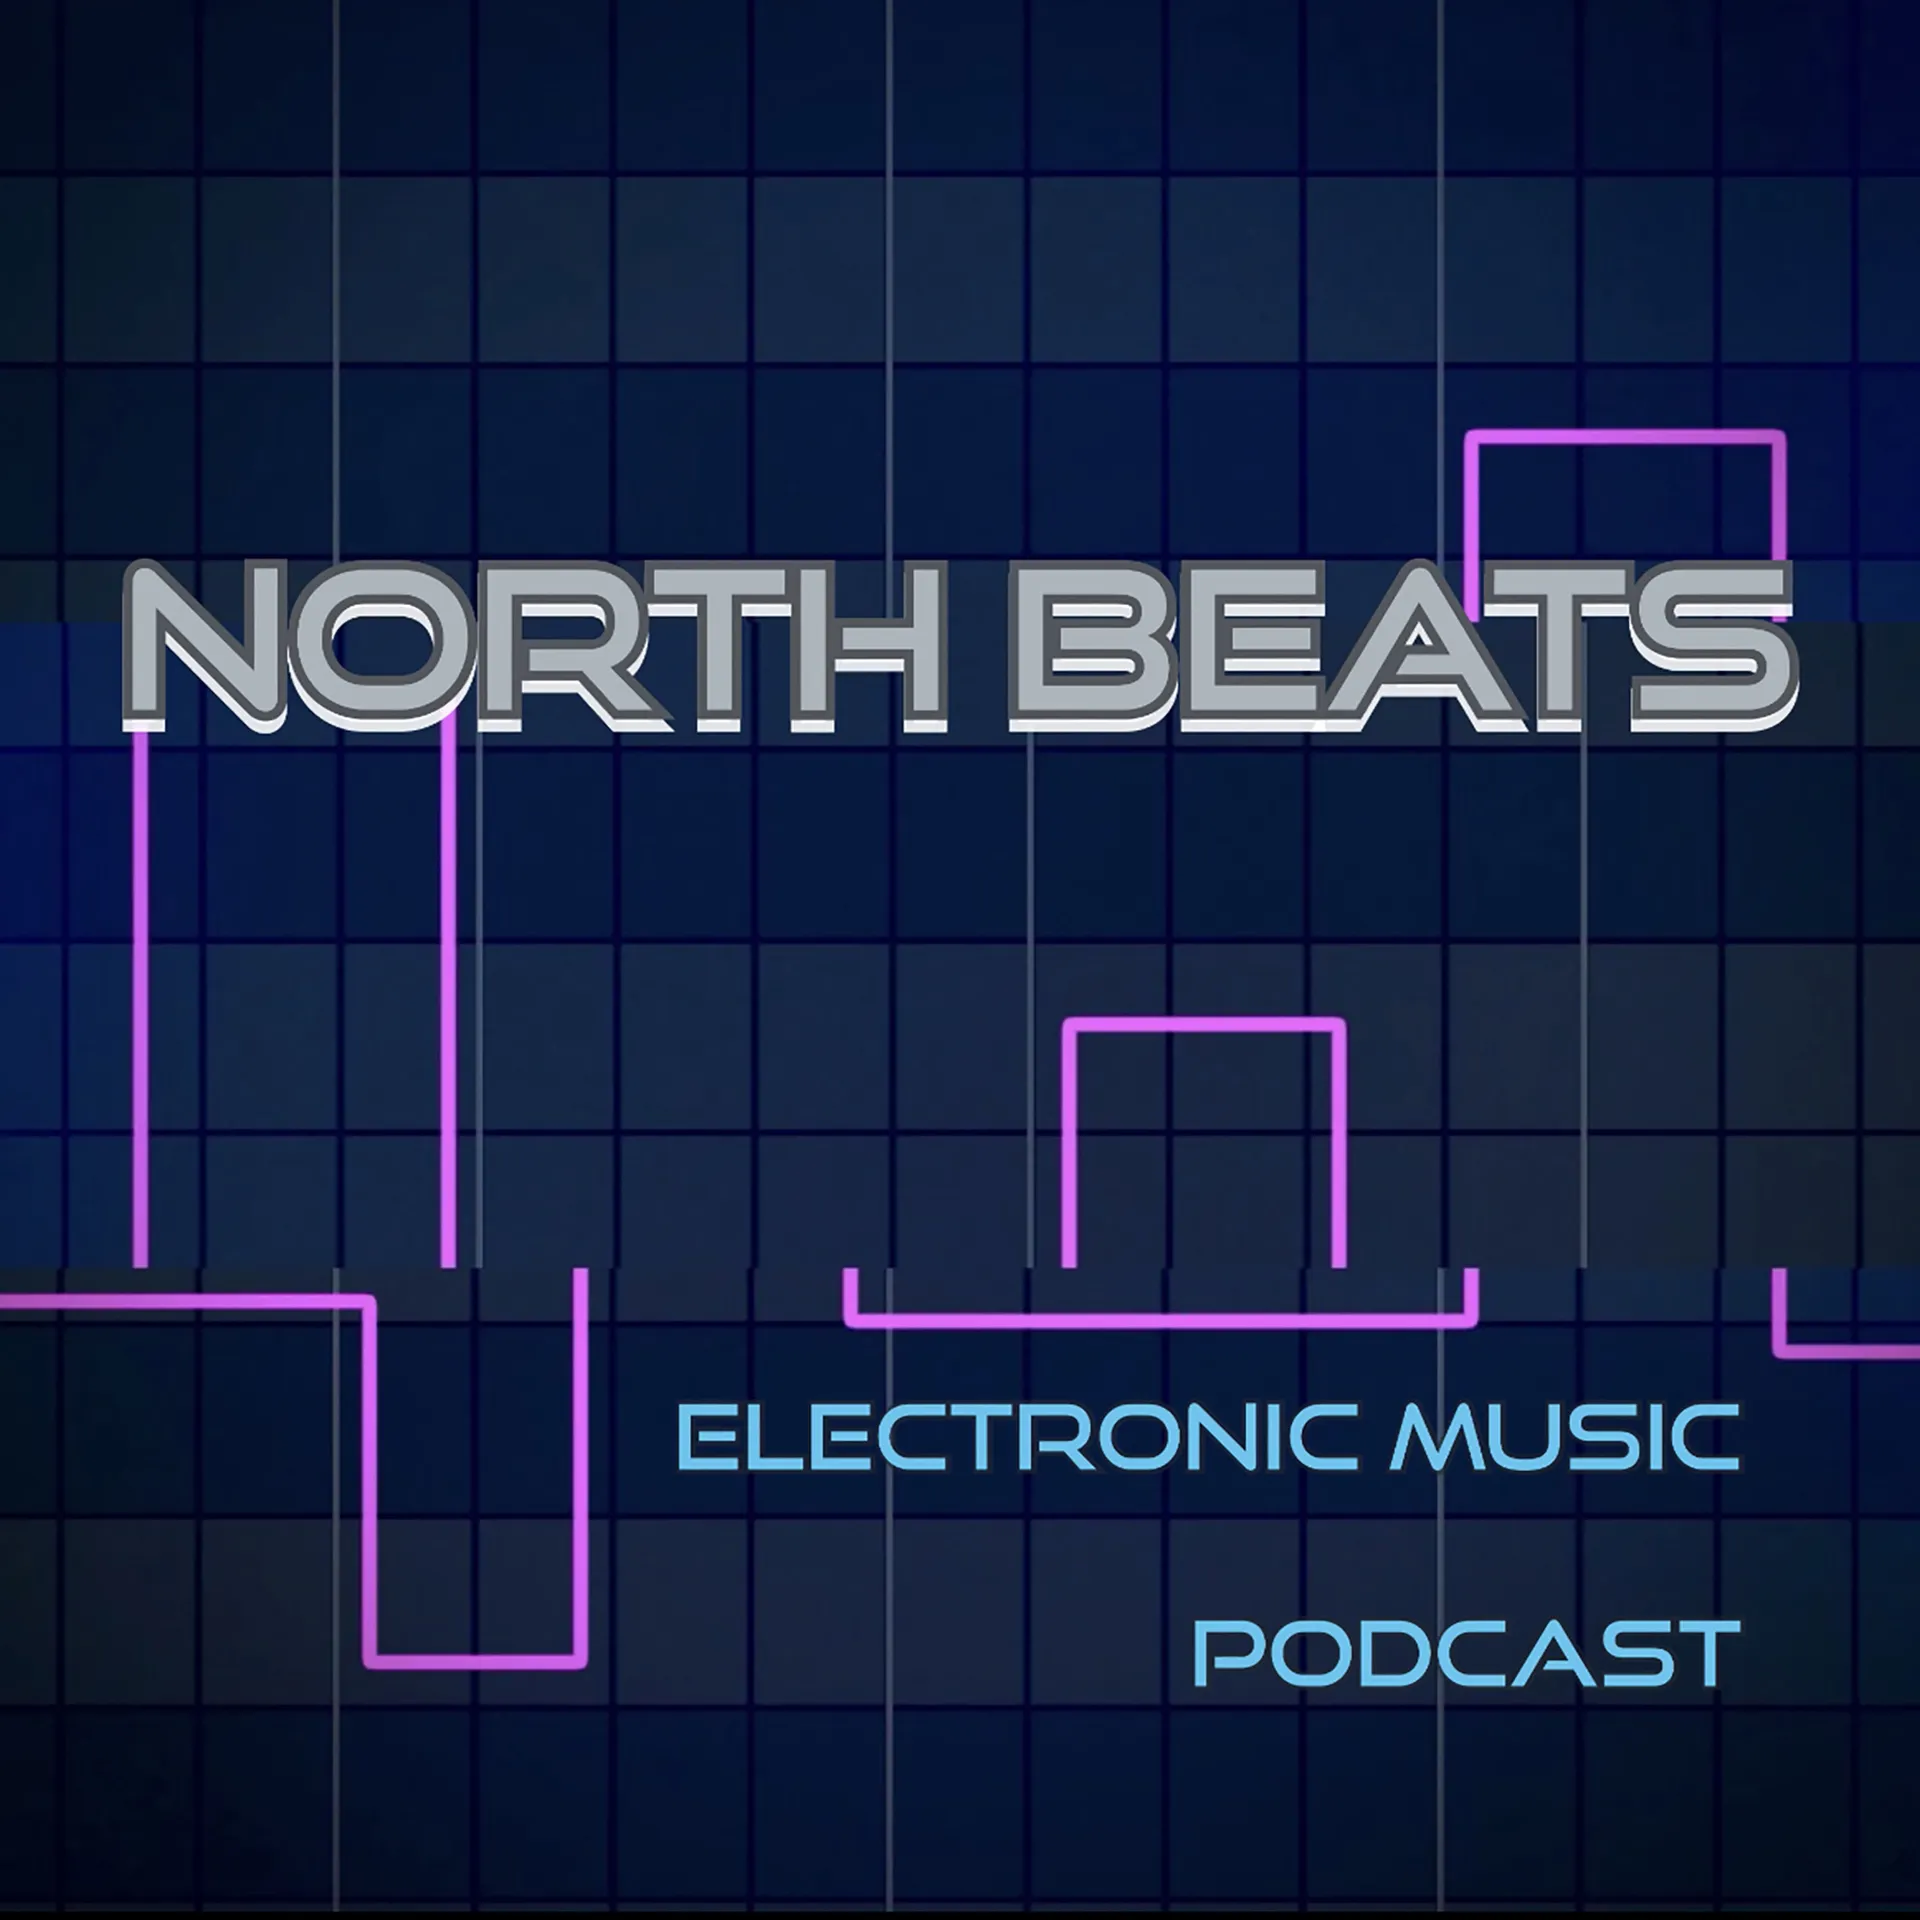 Franck Martin interview on North Beats podcast